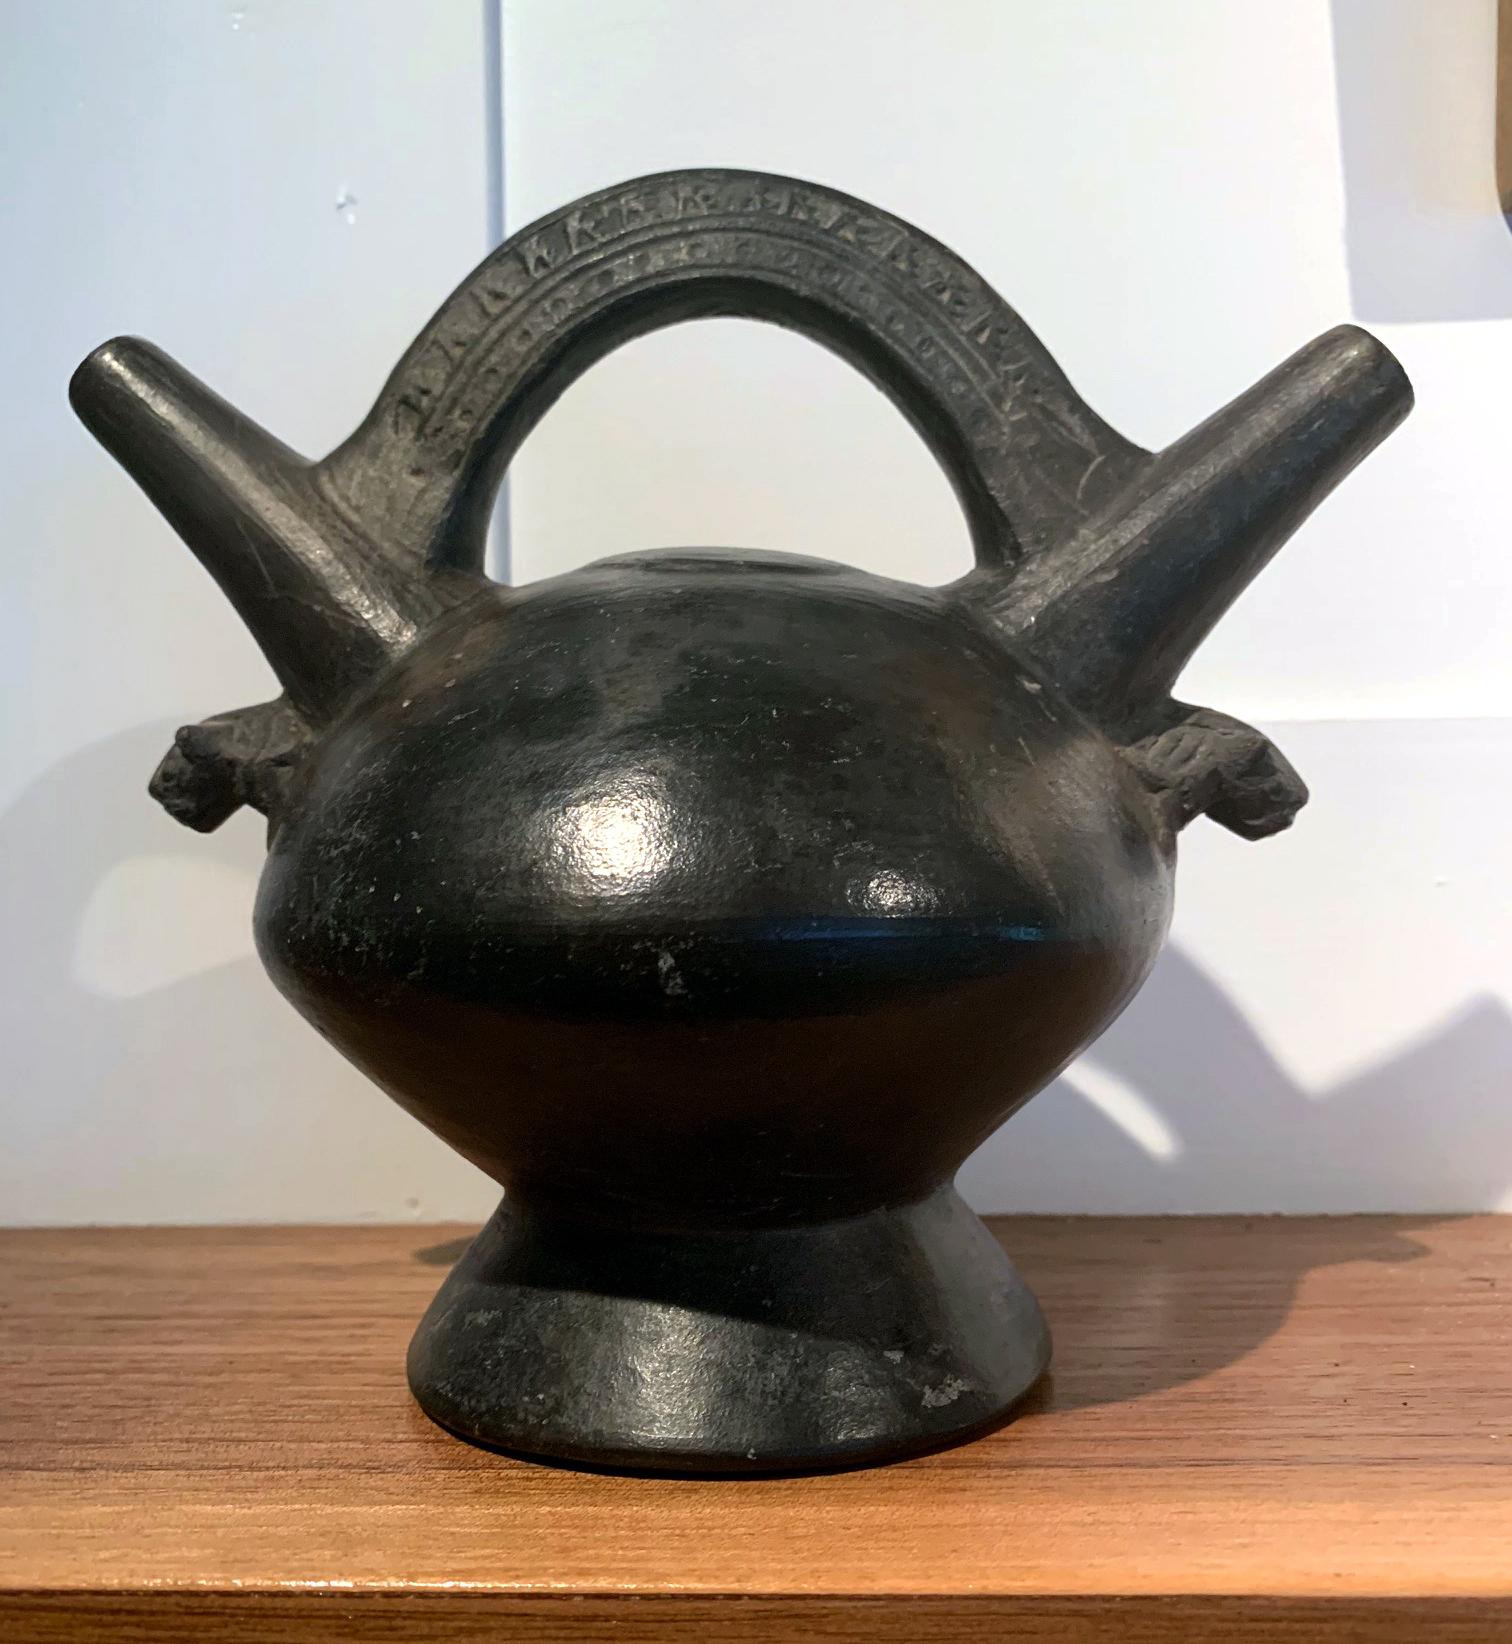 A polished black double spouted vessel from the Pre-Columbian Lambayeque culture (also known as Sicán 750AD -1375 AD) on the northern coast of Peru, straddling the Middle Horizon and Late Intermediate Period of the ancient Central Andes and often